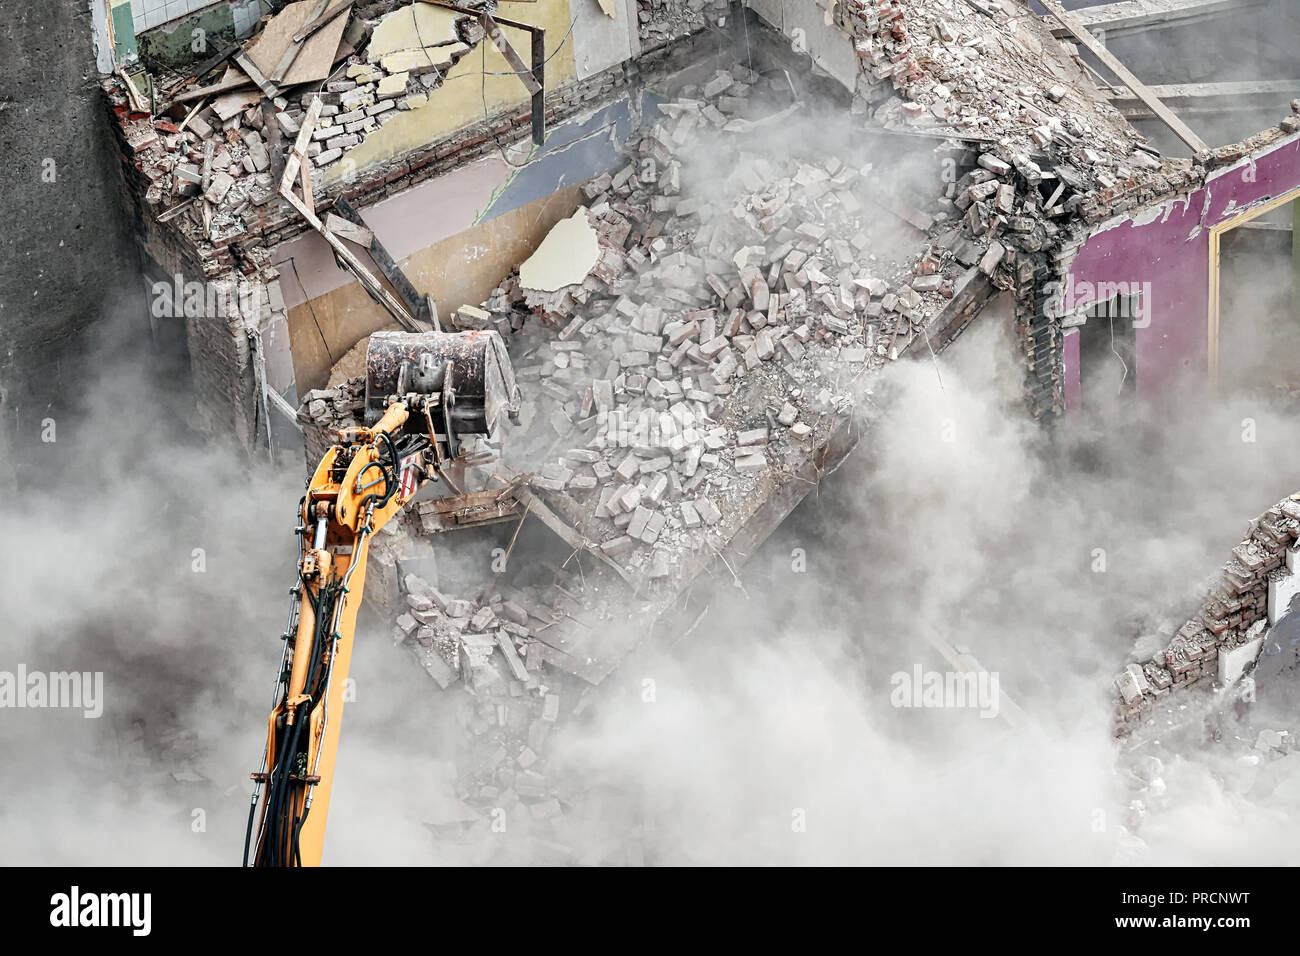 Building demolition with an excavator in dust cloud, view from above. Stock Photo